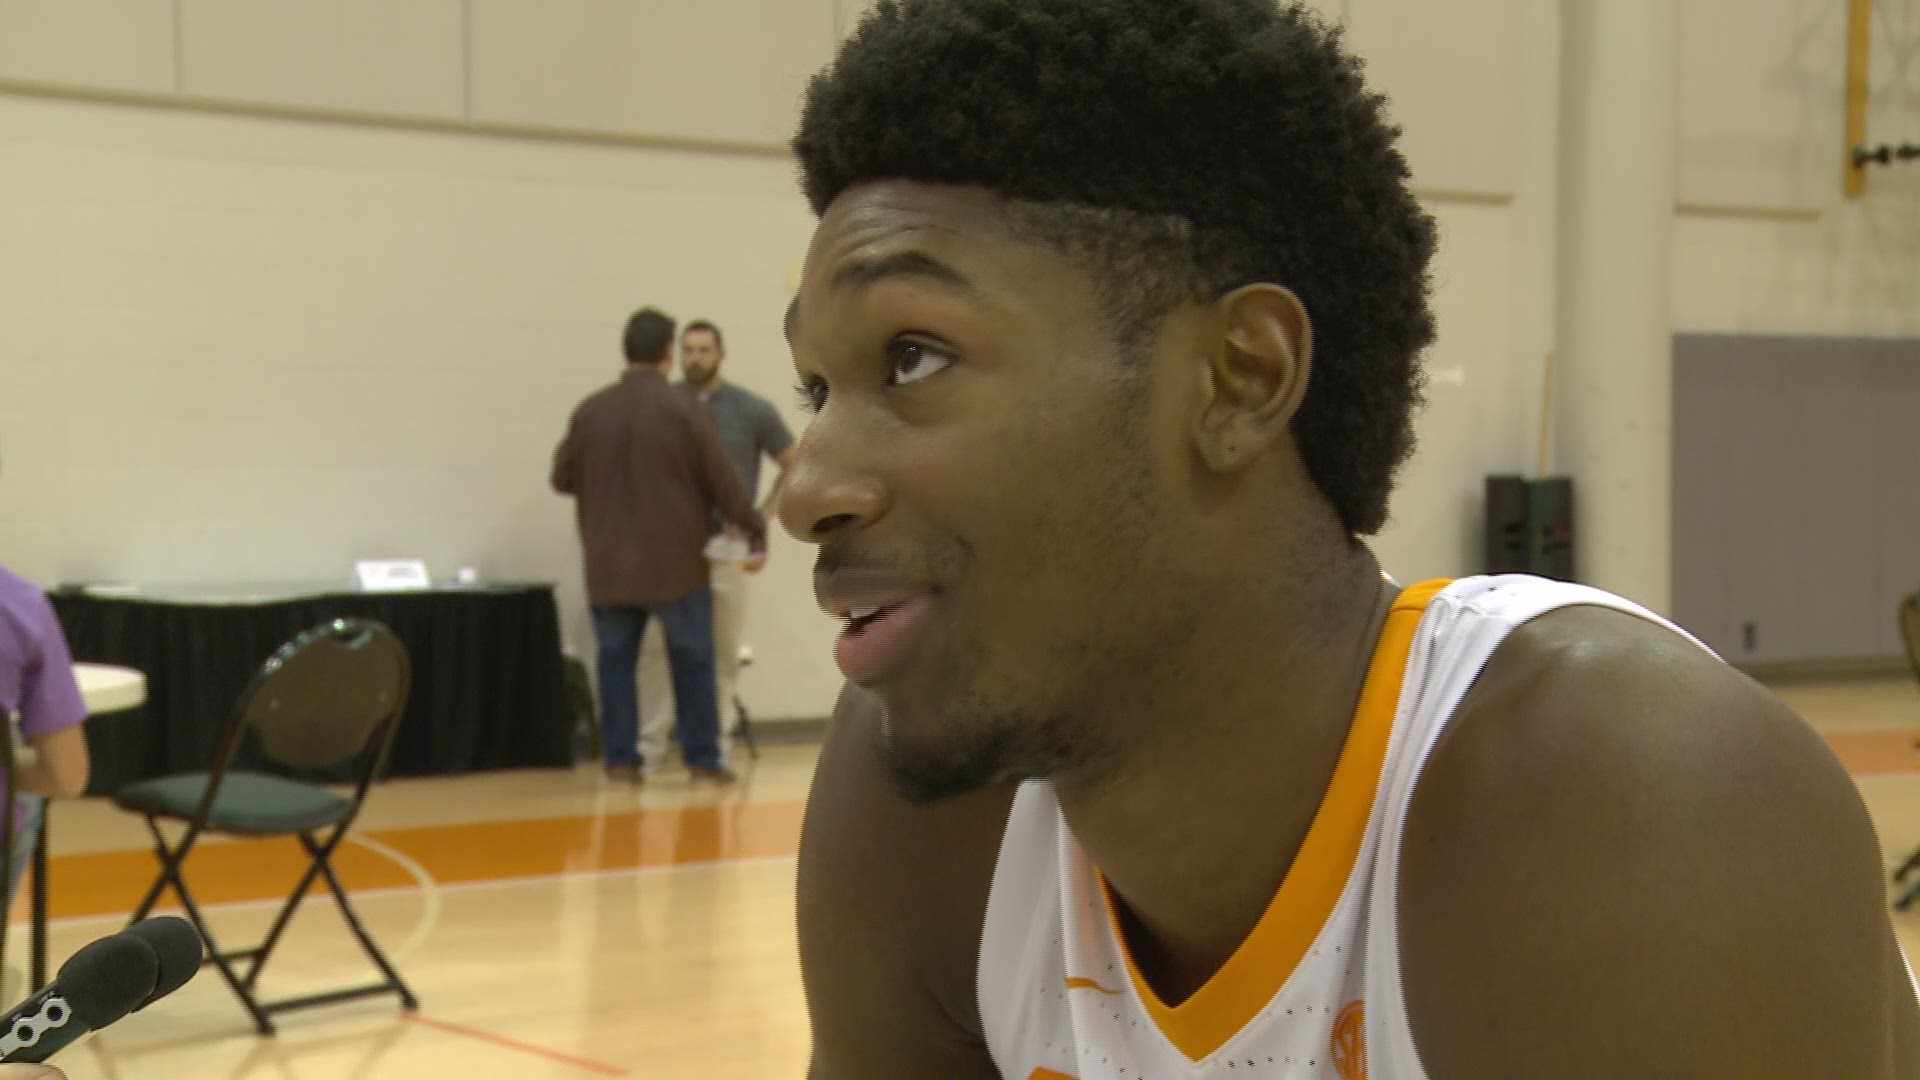 Kyle Alexander talks about his experience dealing with injury during the NCAA tournament at Tennessee Media Day.